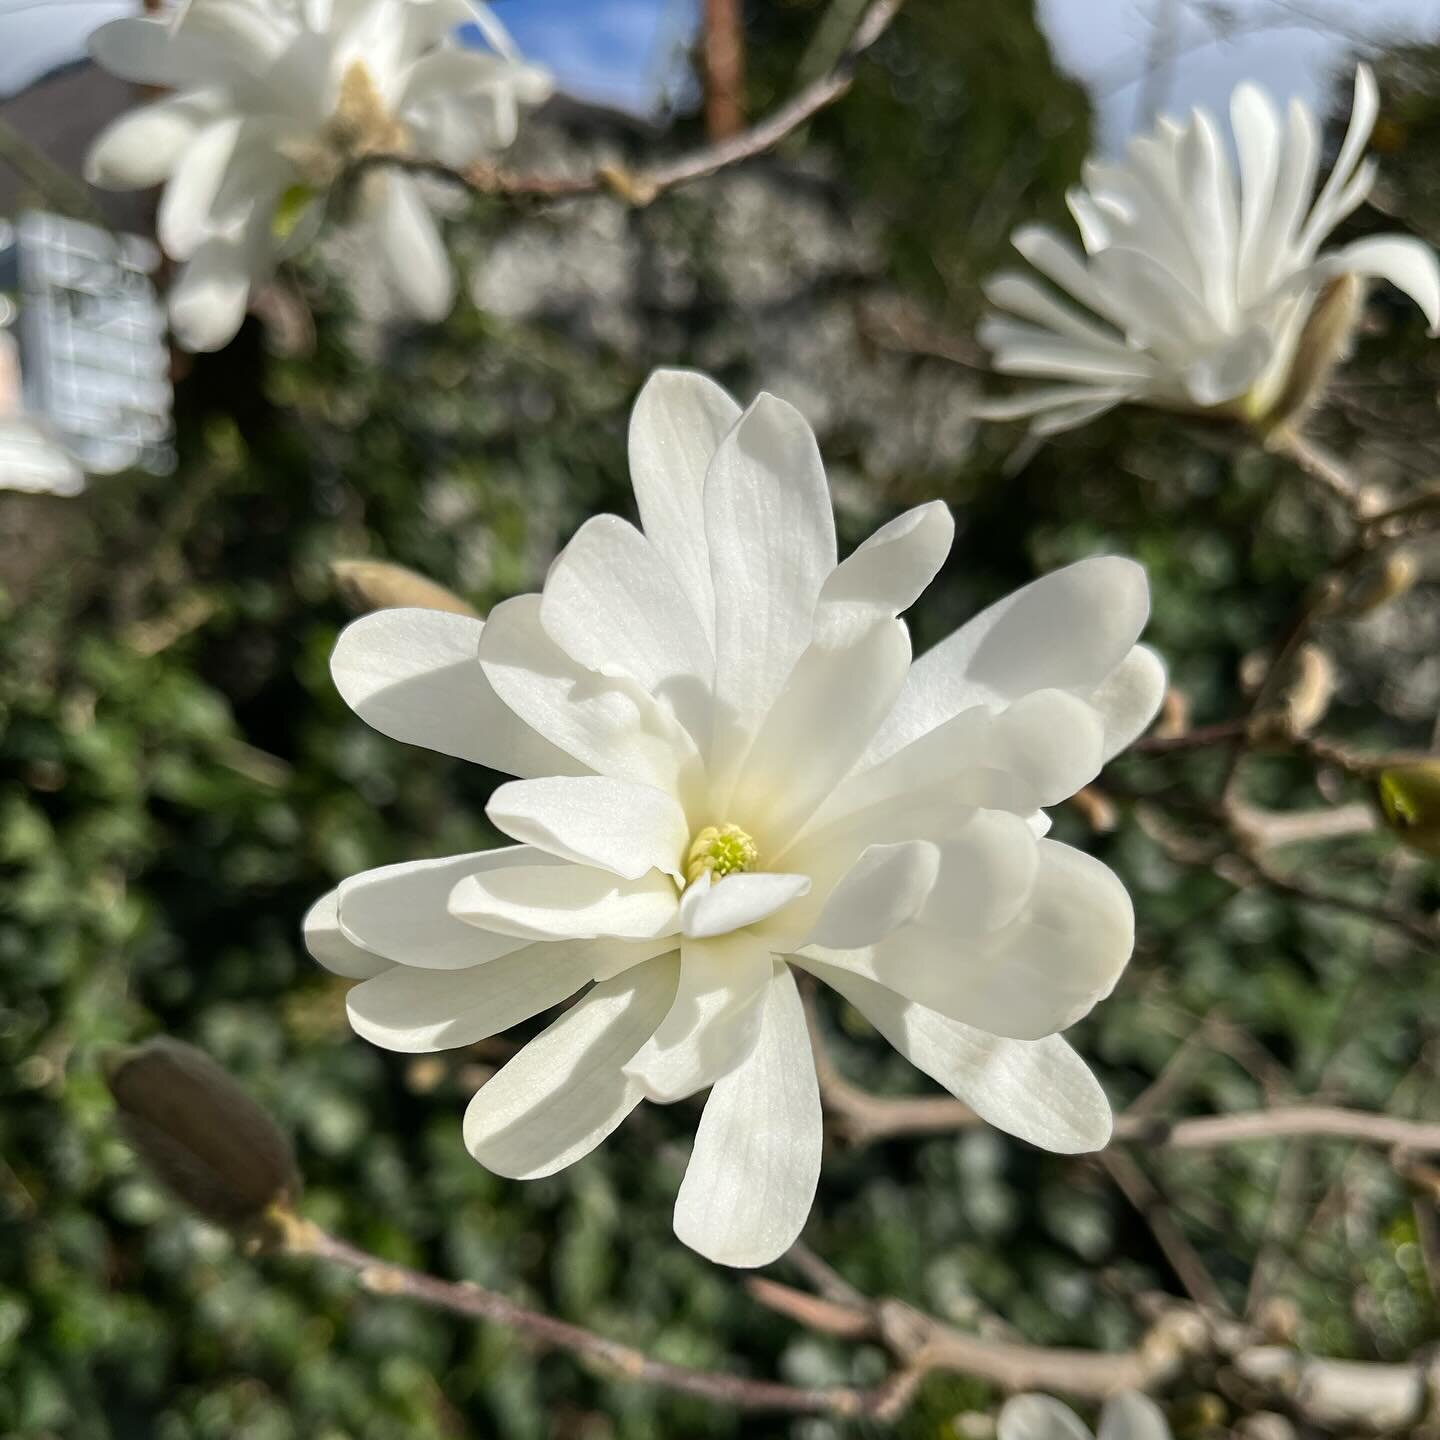 so many blooming lovely #magnolias, soaking up the sun